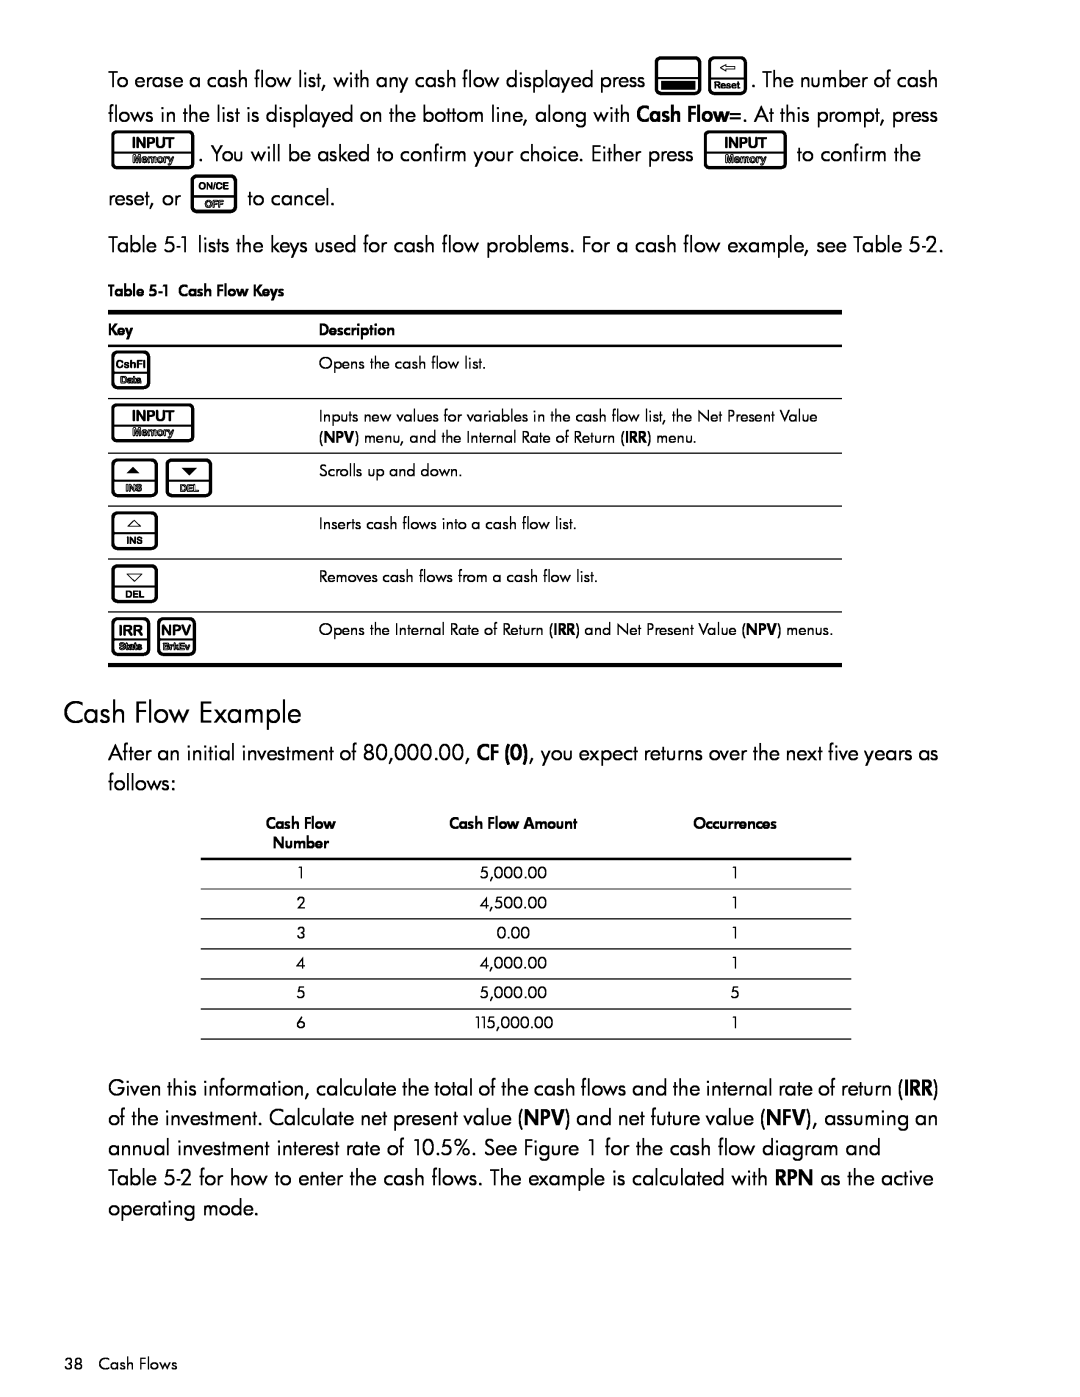 HP 20b Consultant Financial, 30b Professional manual Cash Flow Example, Opens the cash flow list, Scrolls up and down 